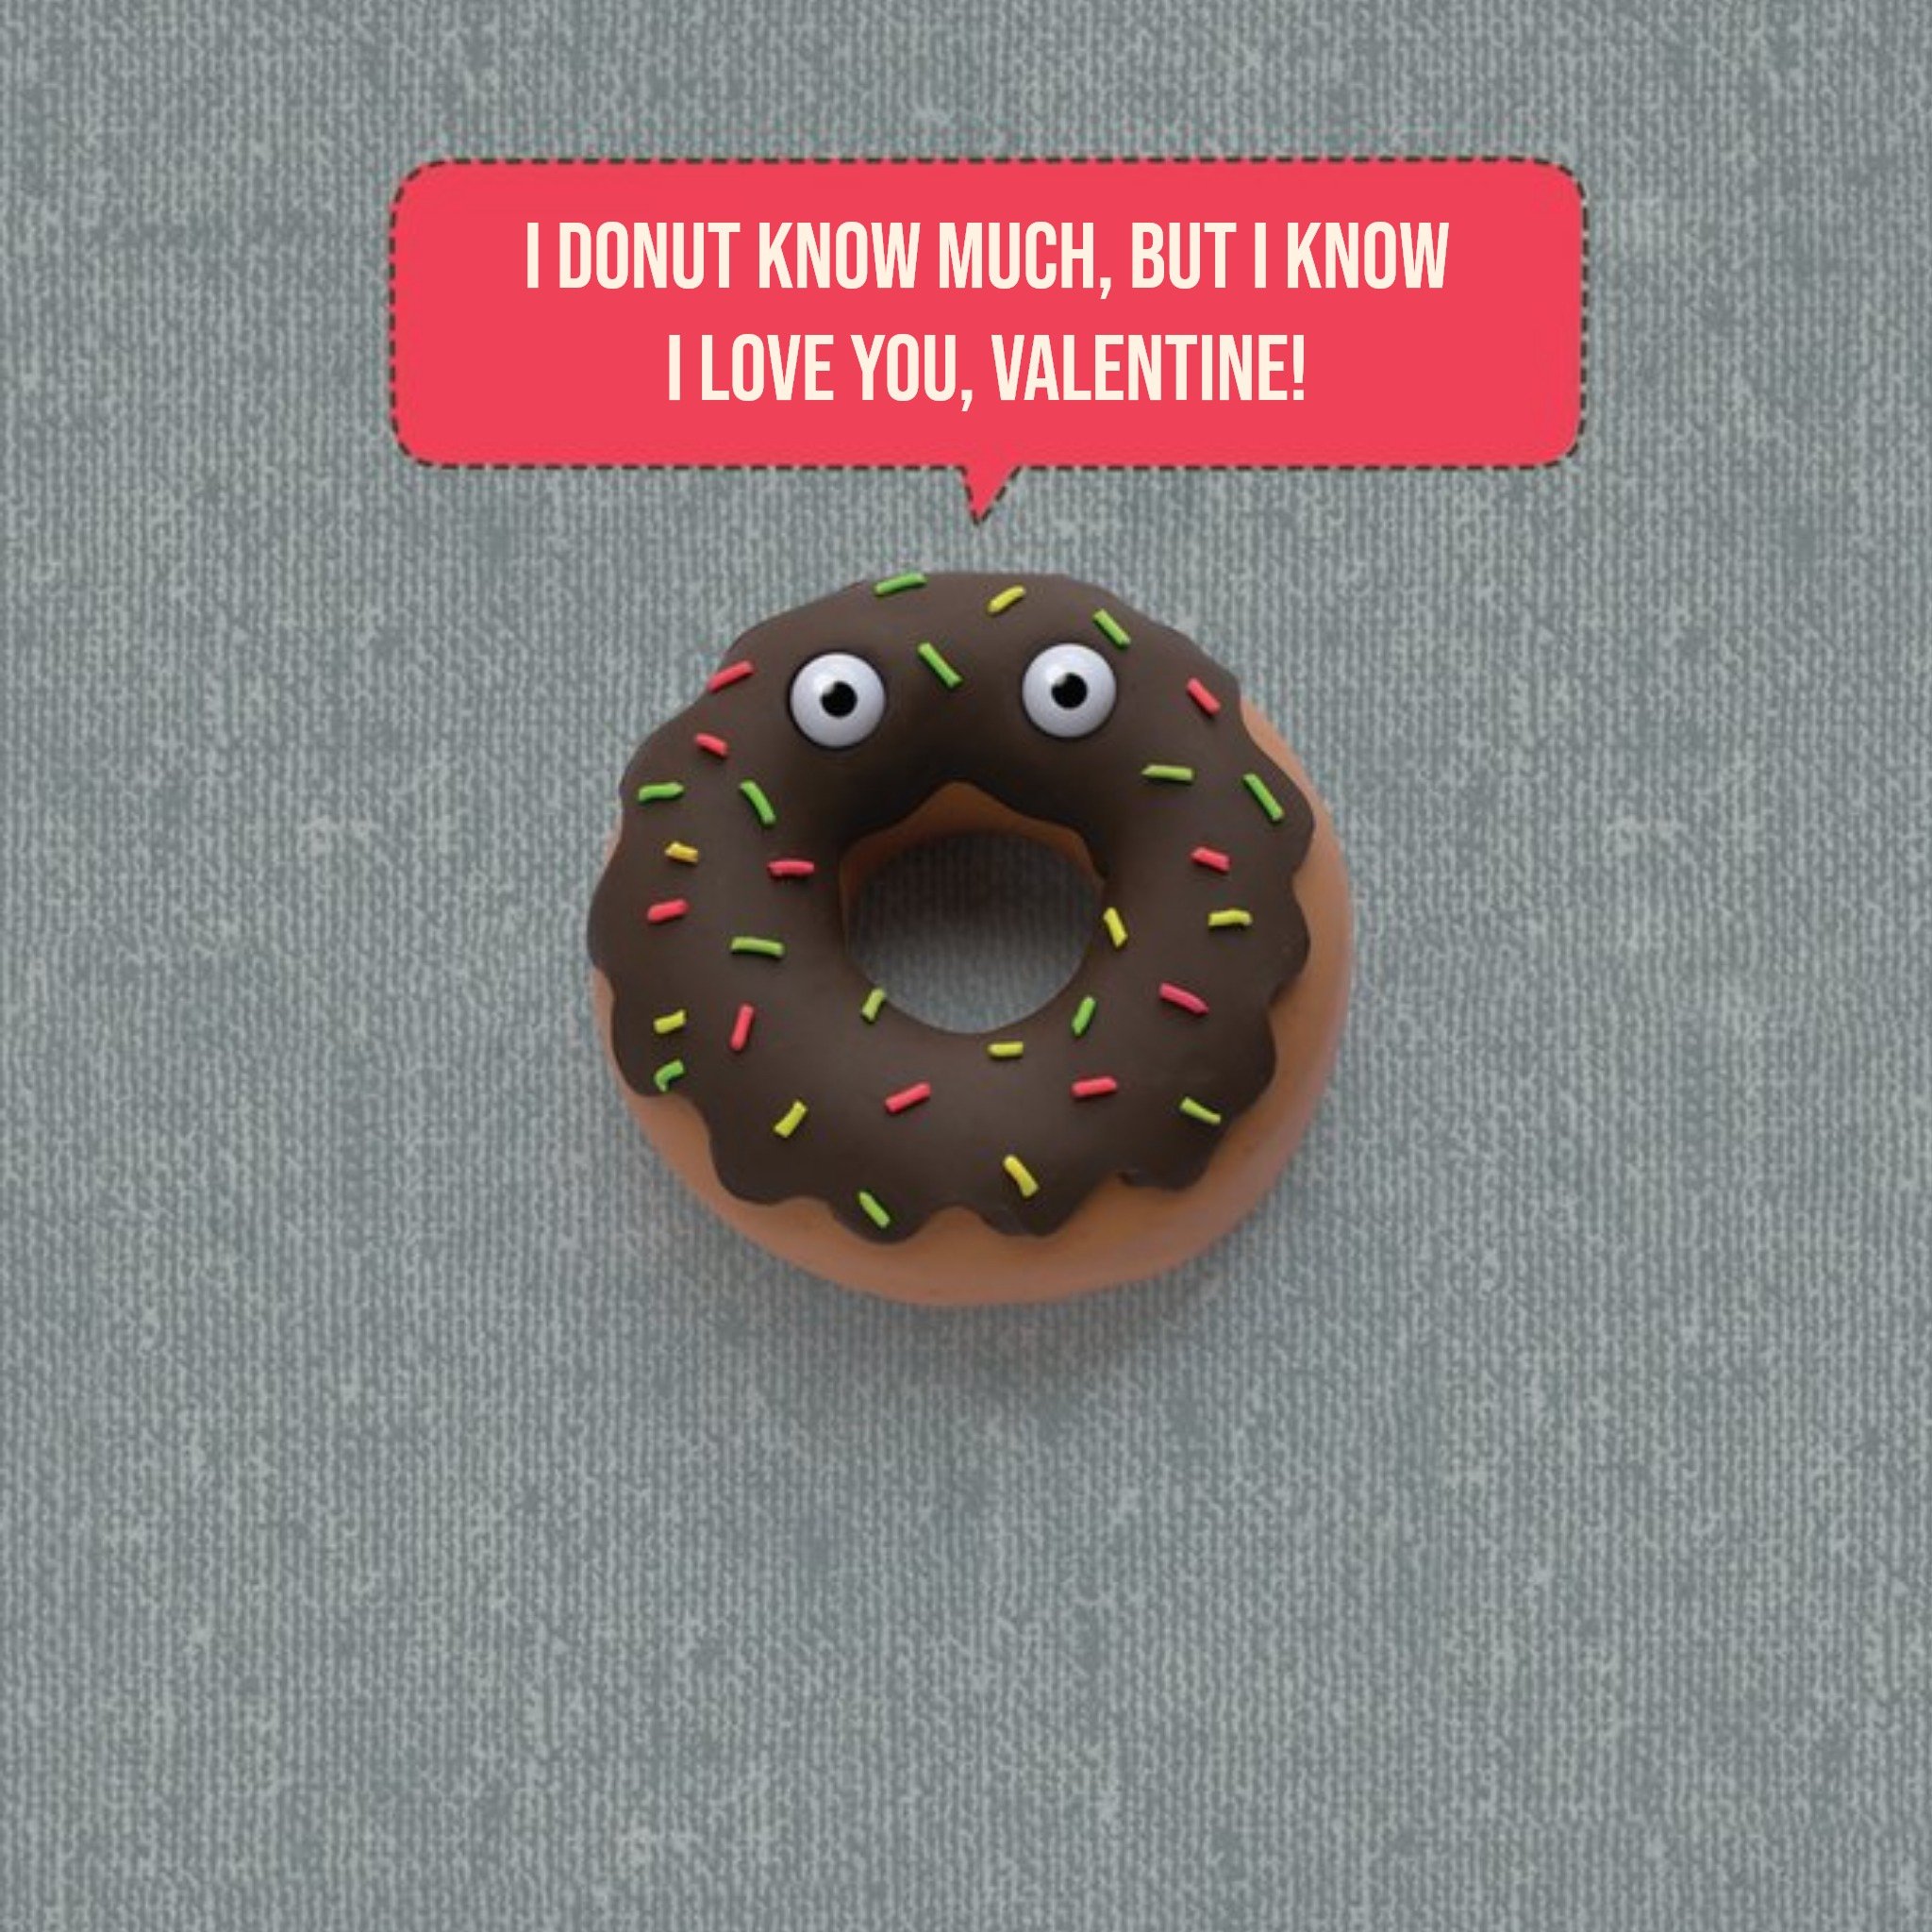 Moonpig I Donut Know Much, But I Know I Love You Funny Valentine's Day Card, Square